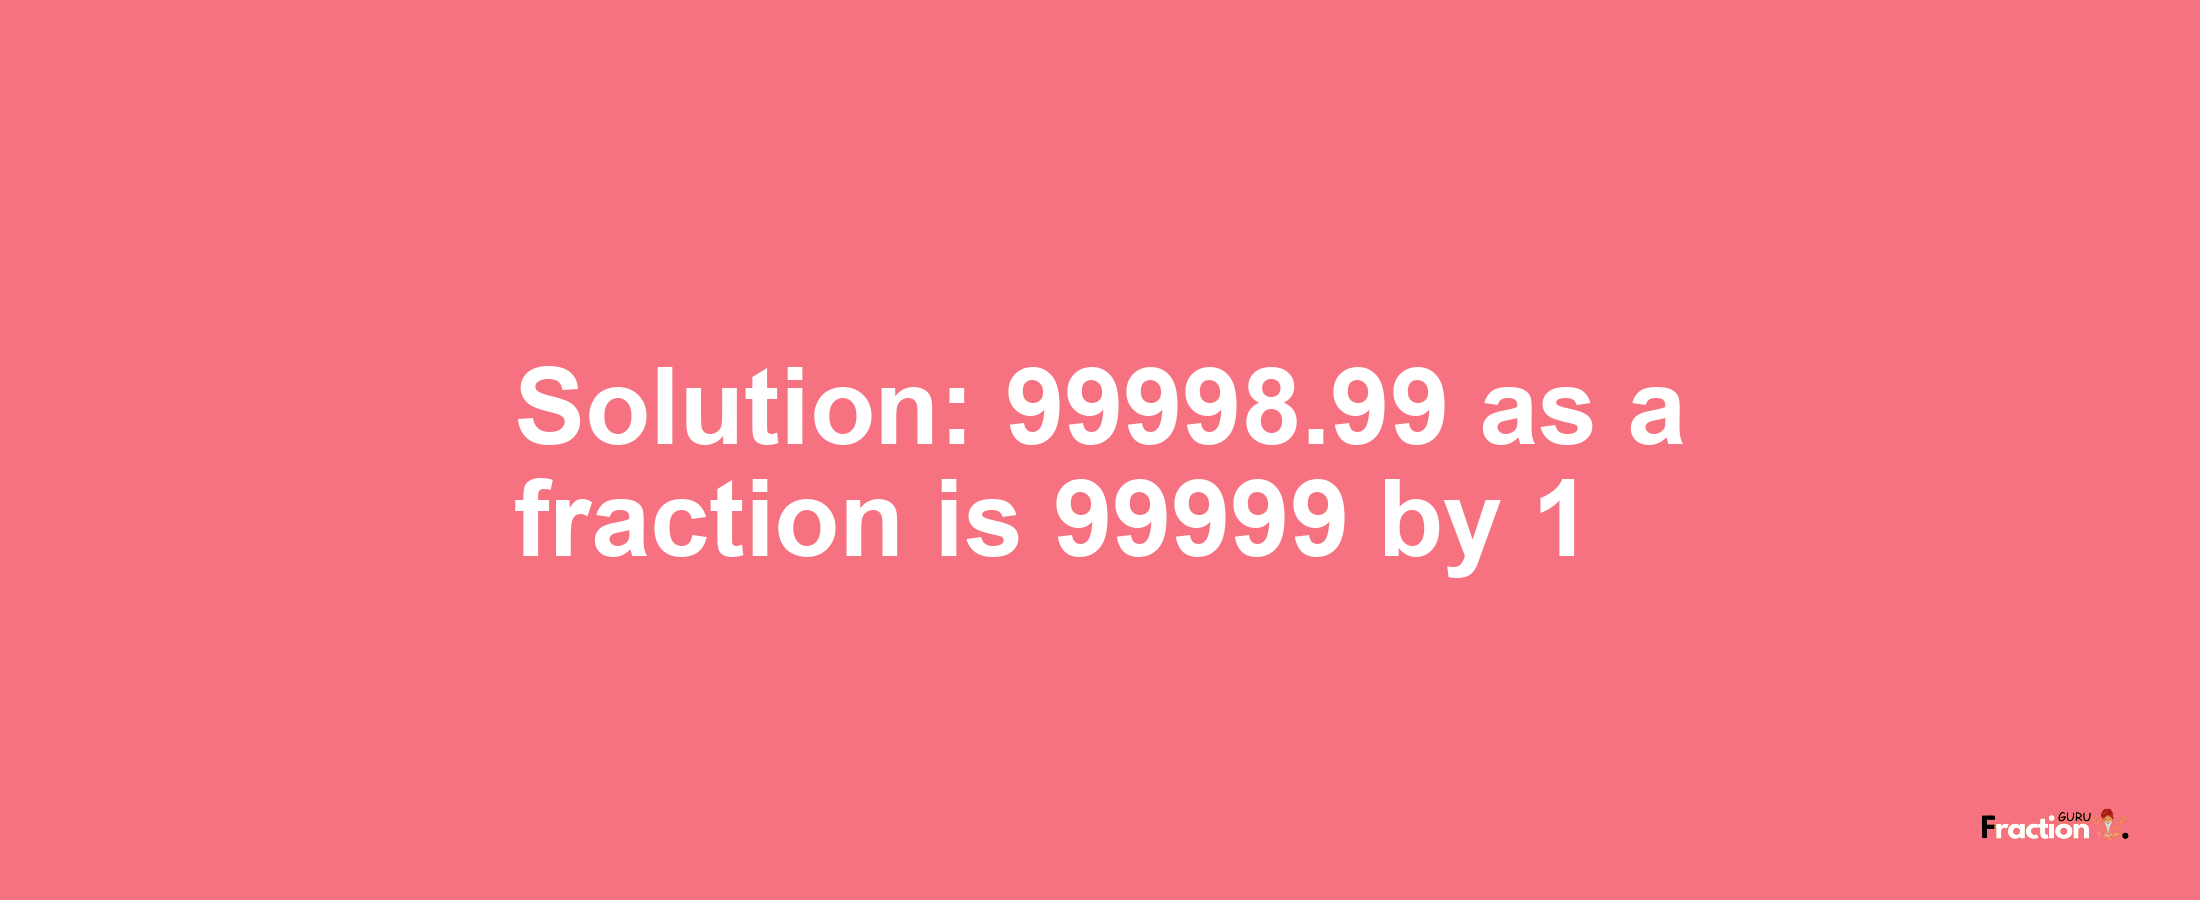 Solution:99998.99 as a fraction is 99999/1